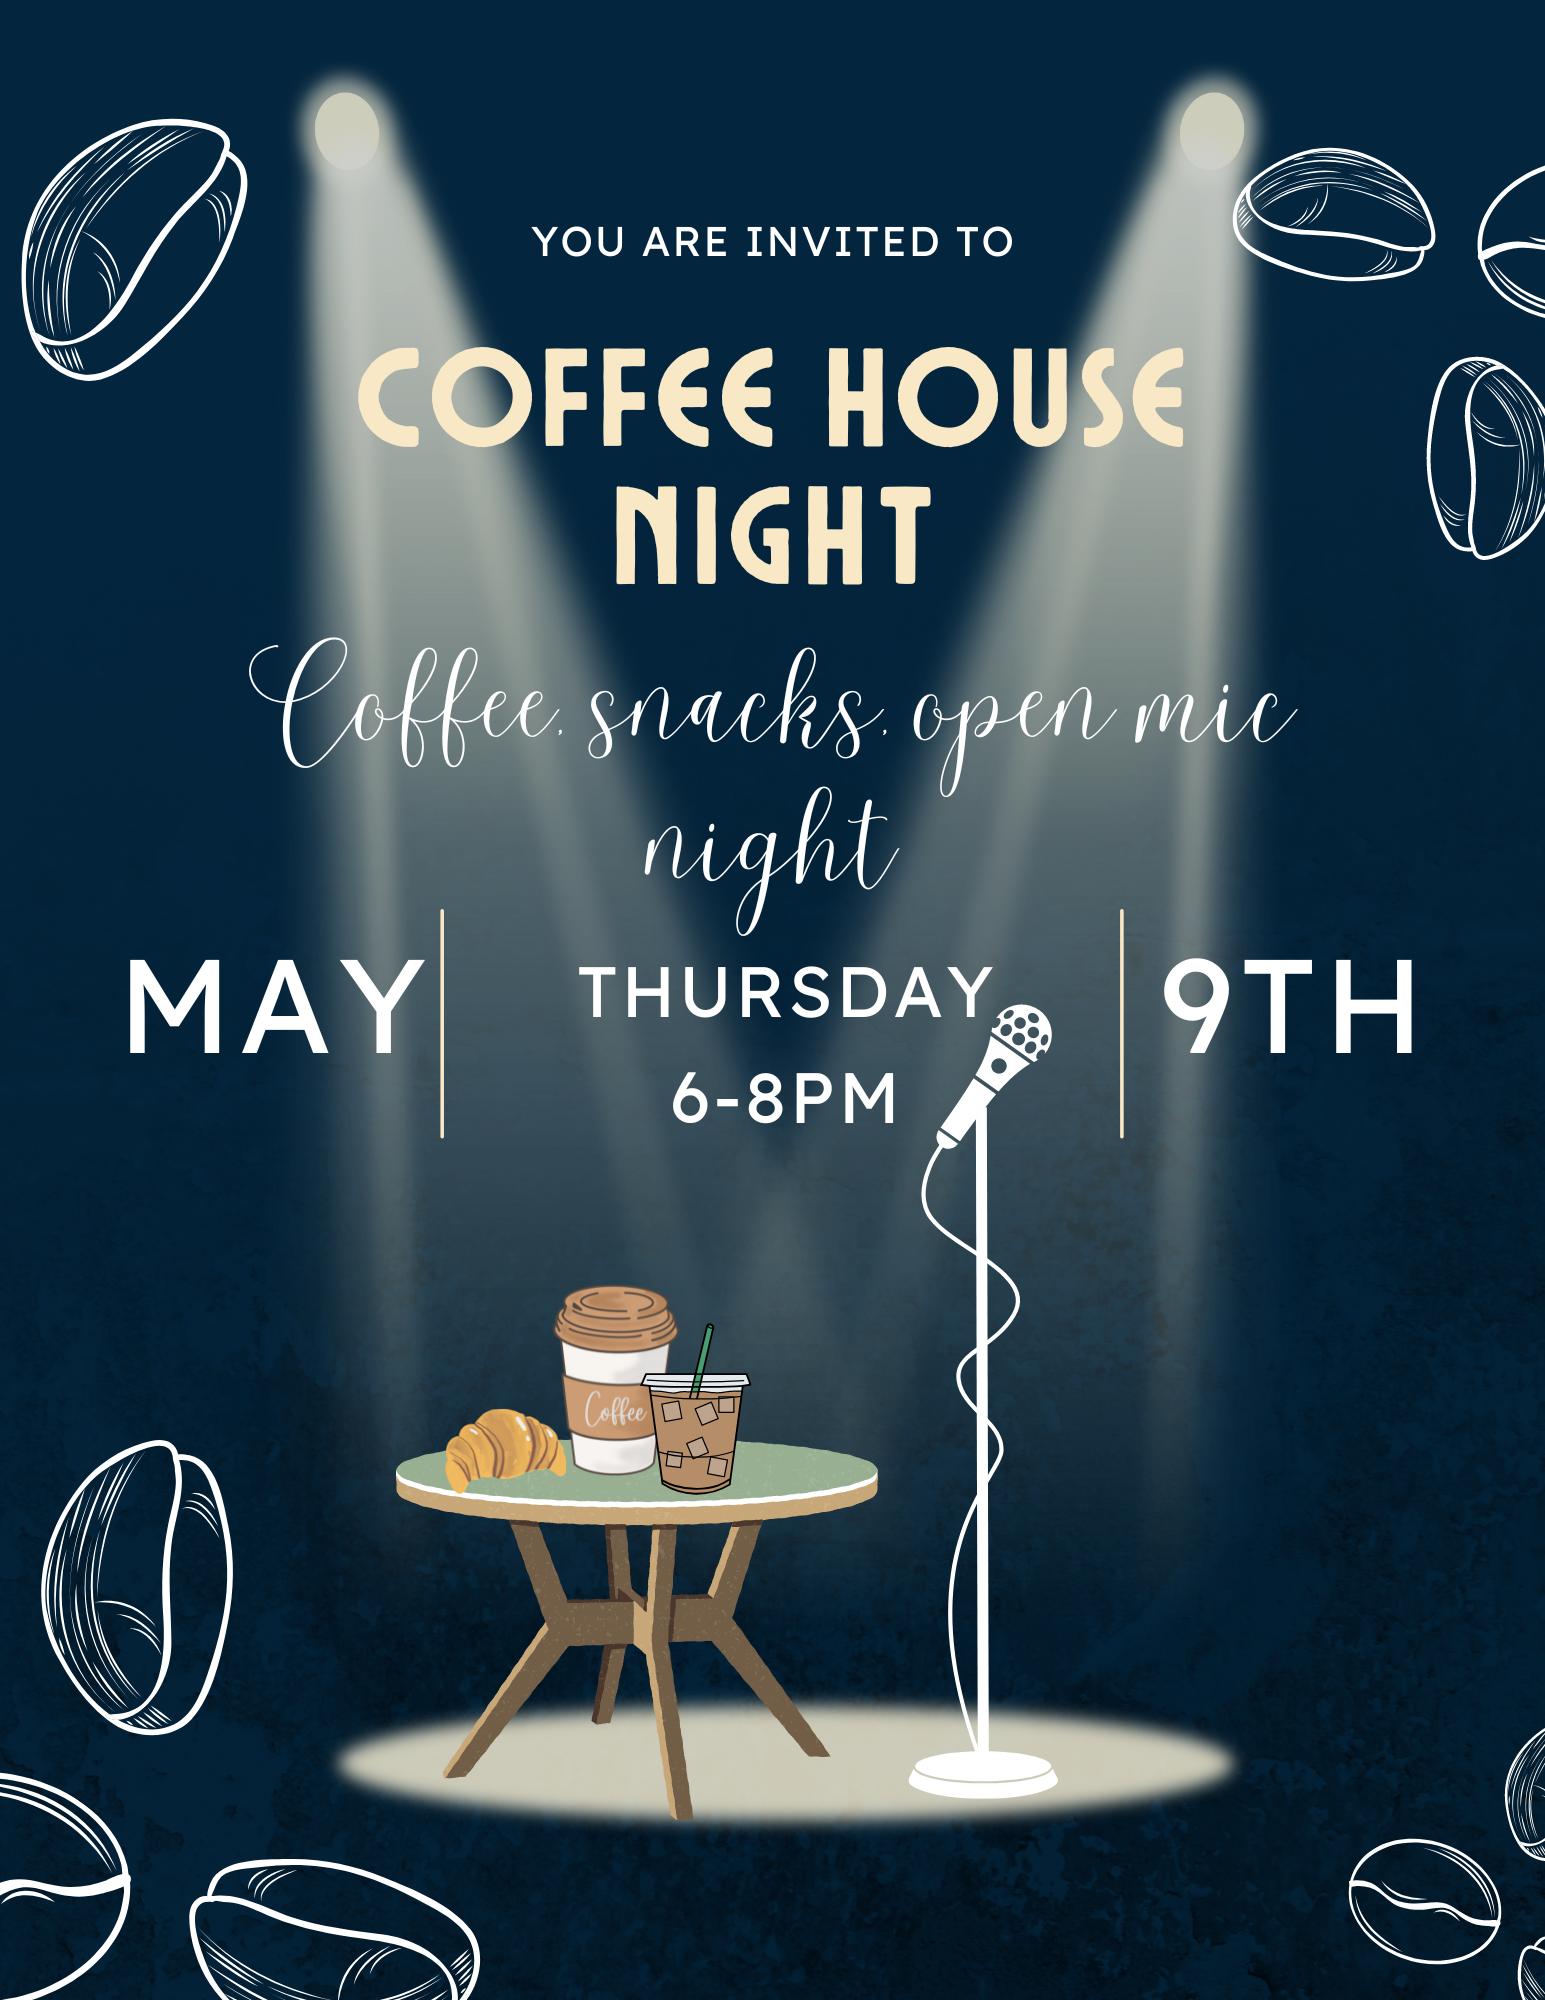 you are invited to coffee house night